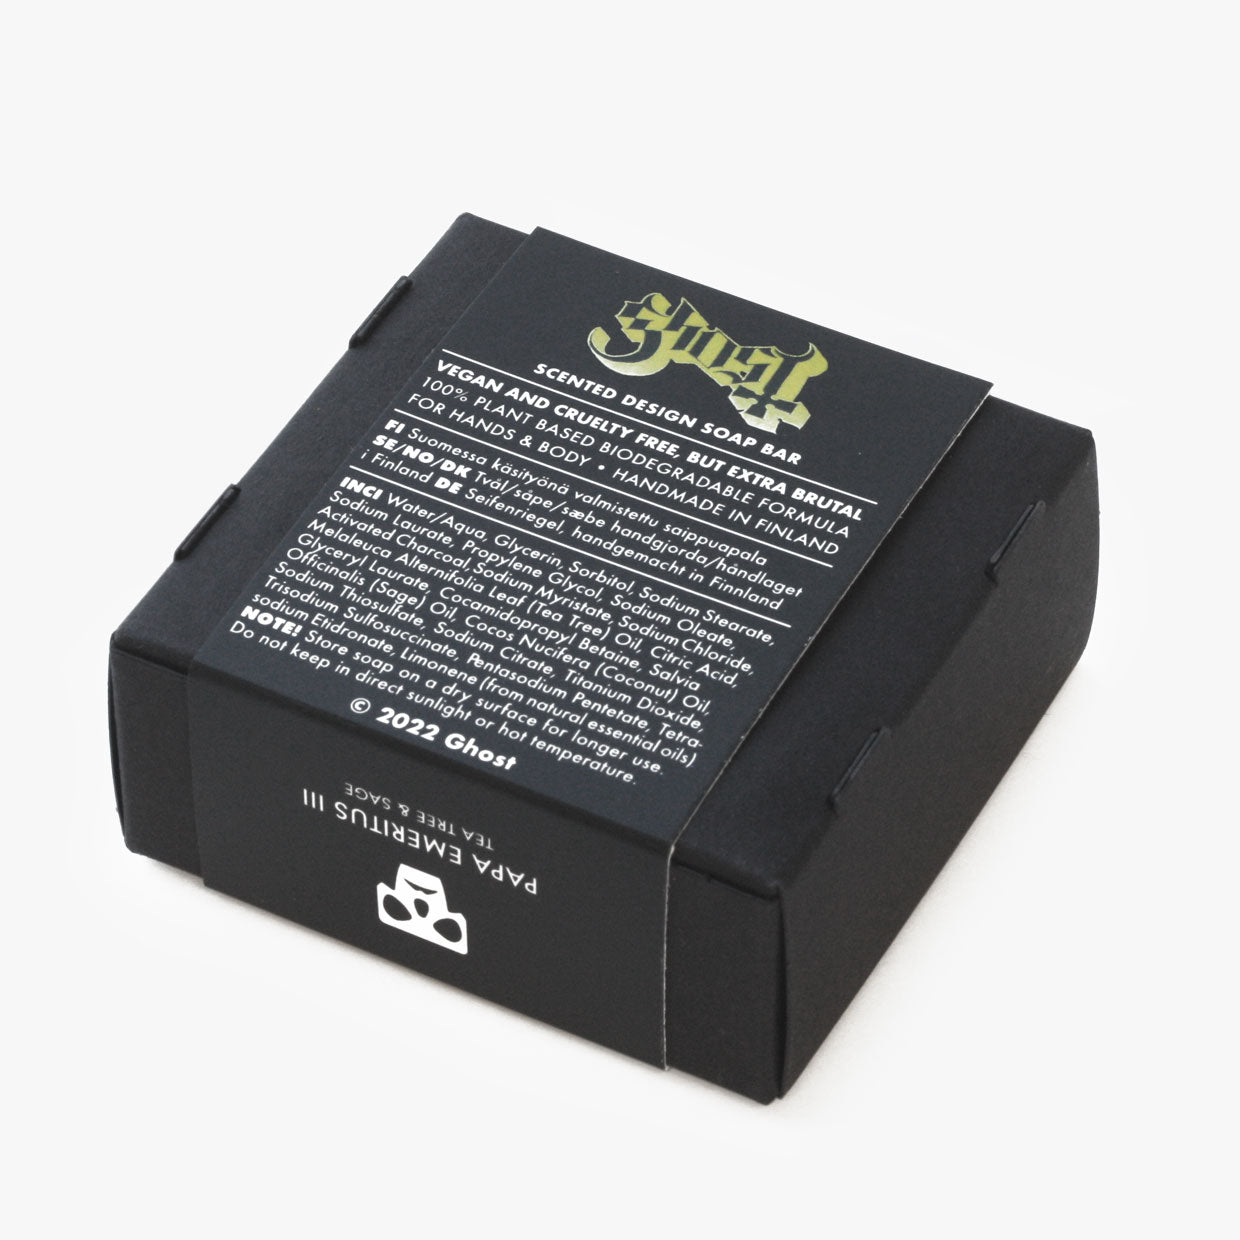 Official Ghost soap in the image of Papa Emeritus Terzo III black cardboard box back side with Ghost logo